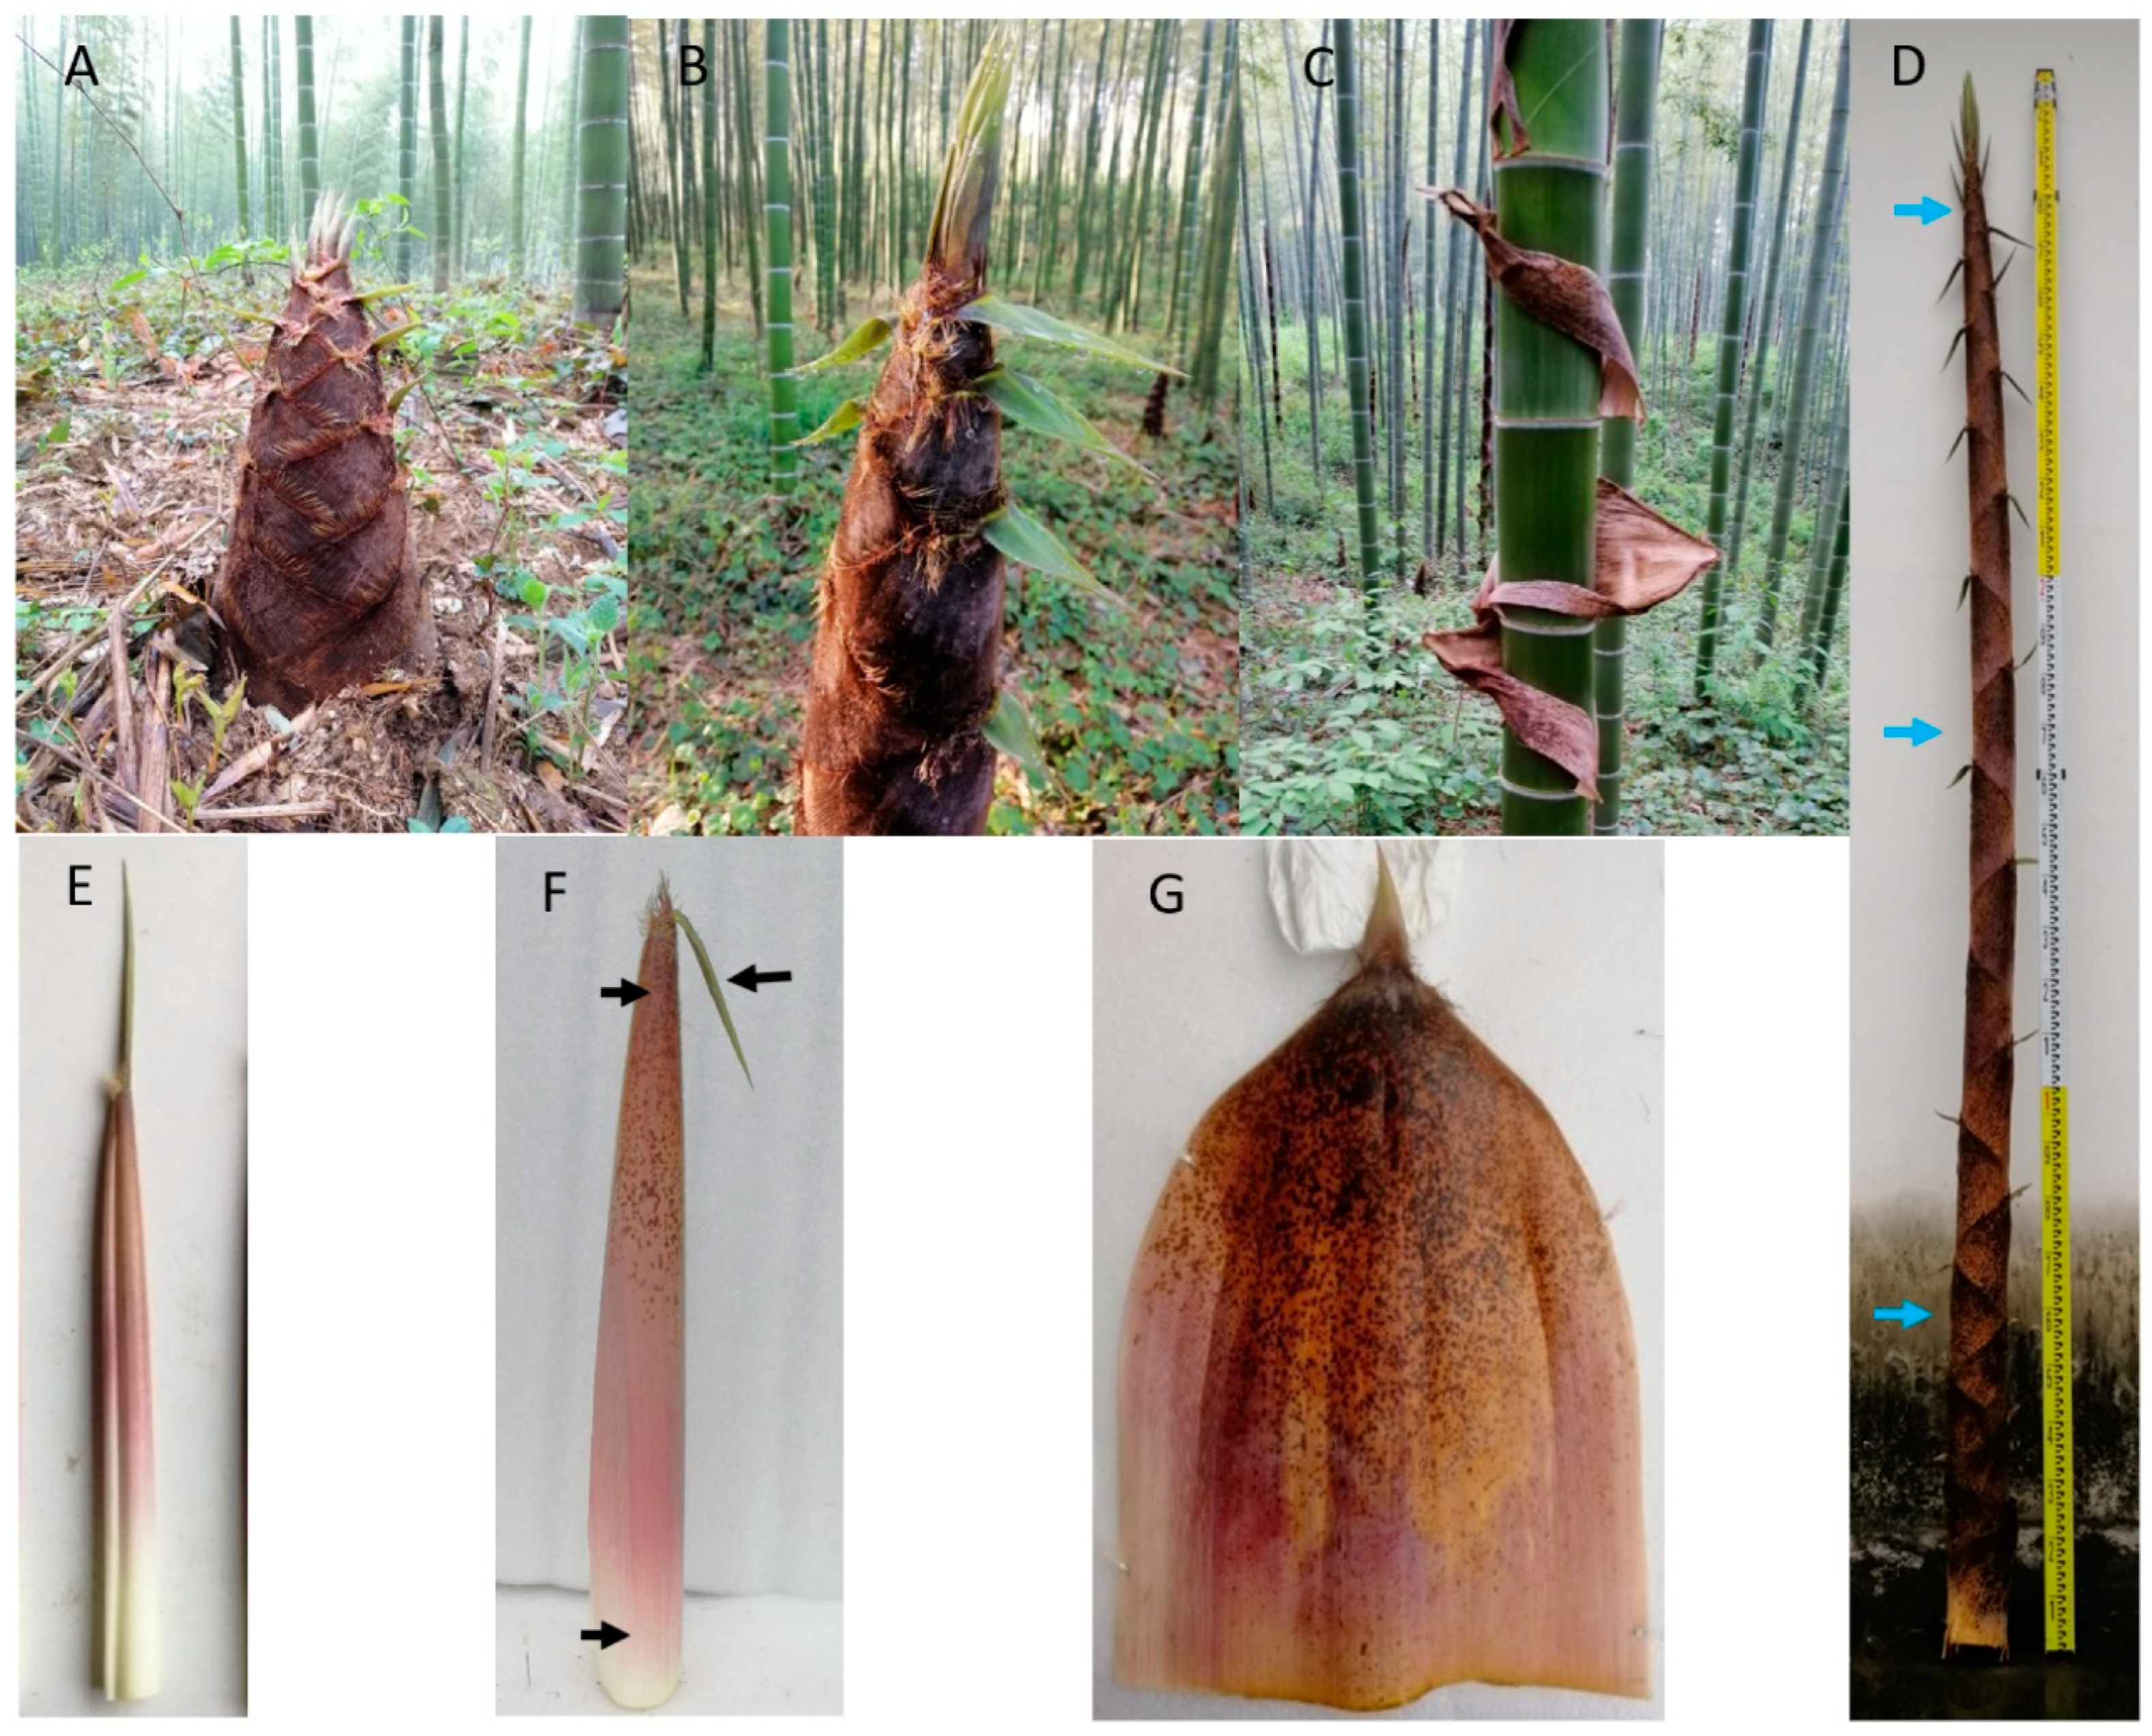 Plants Free Full-Text Photosynthesis, Phytohormone Signaling and Sugar Catabolism in the Culm Sheaths of Phyllostachys edulis hq image